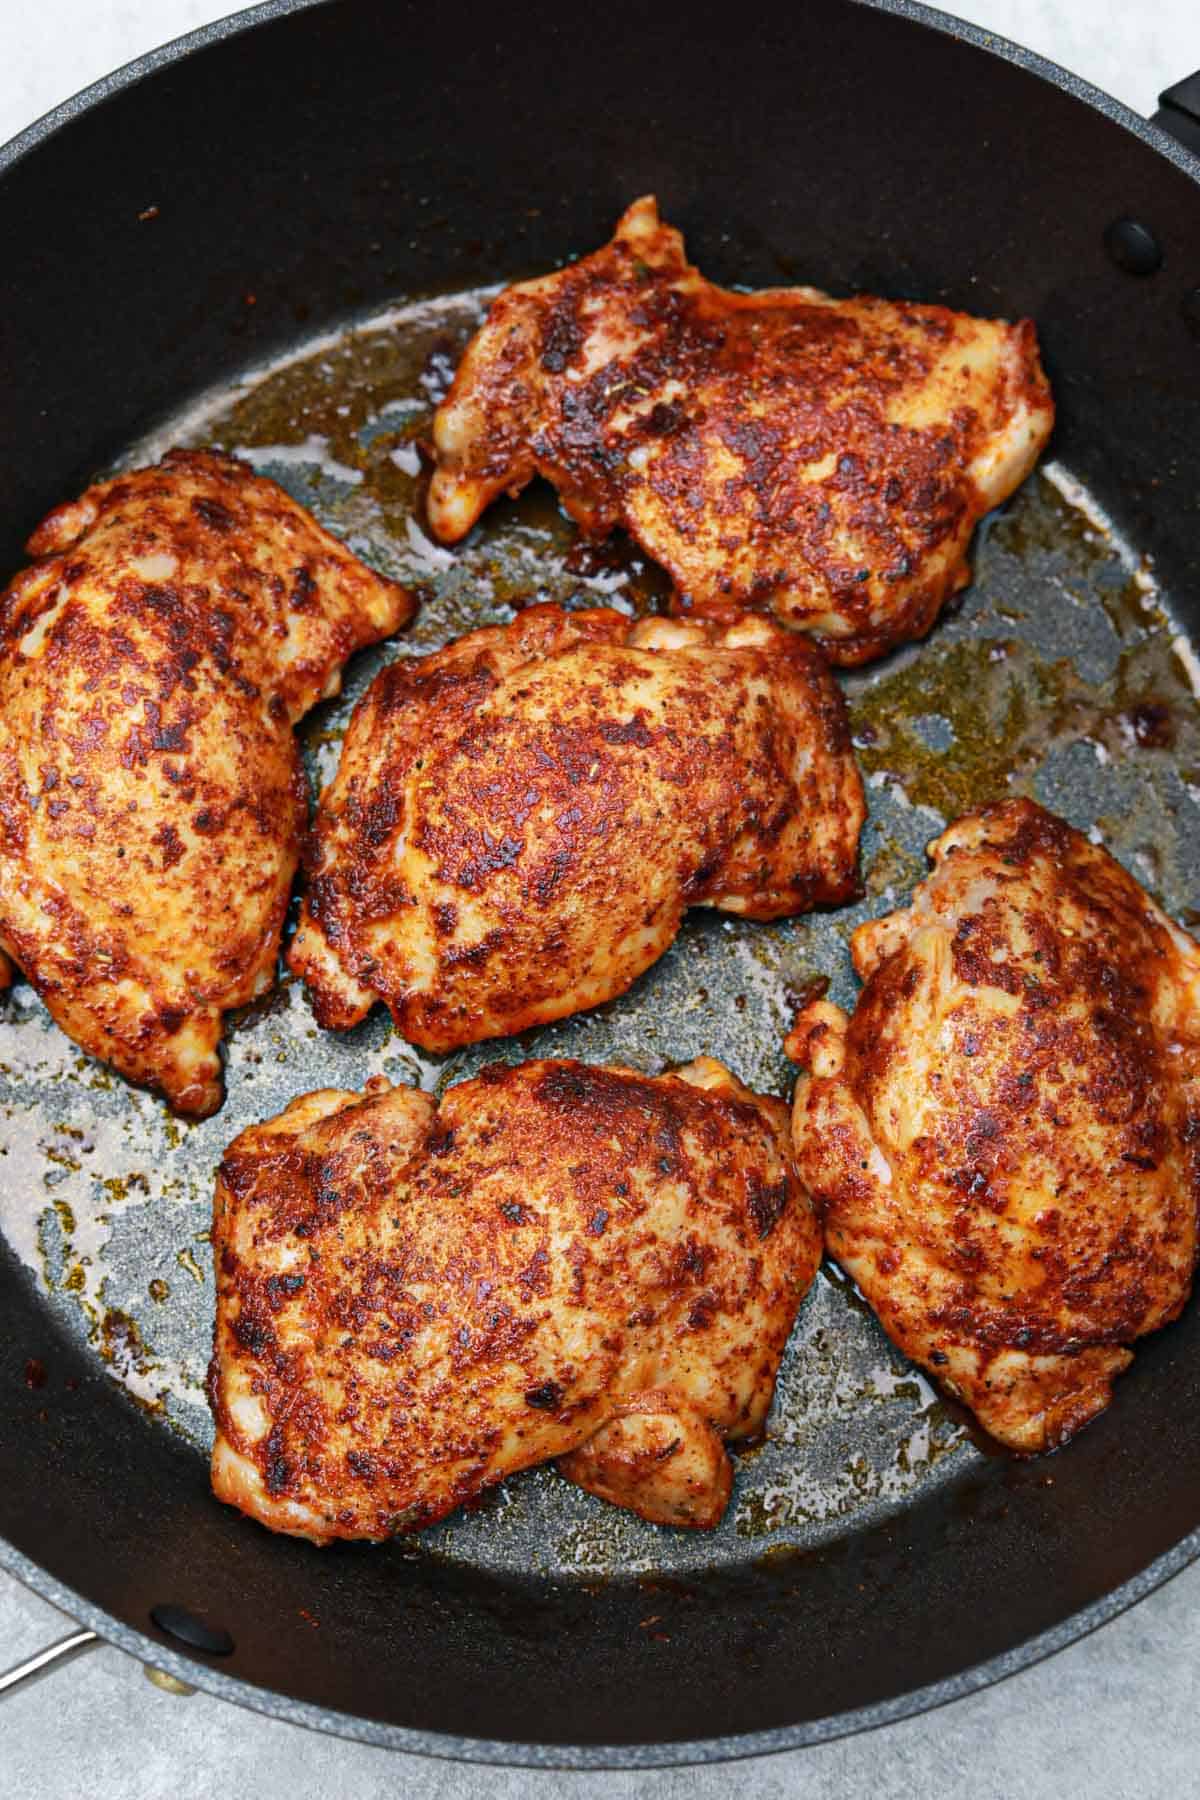 the fried boneless skinless chicken thighs in the frying pan.